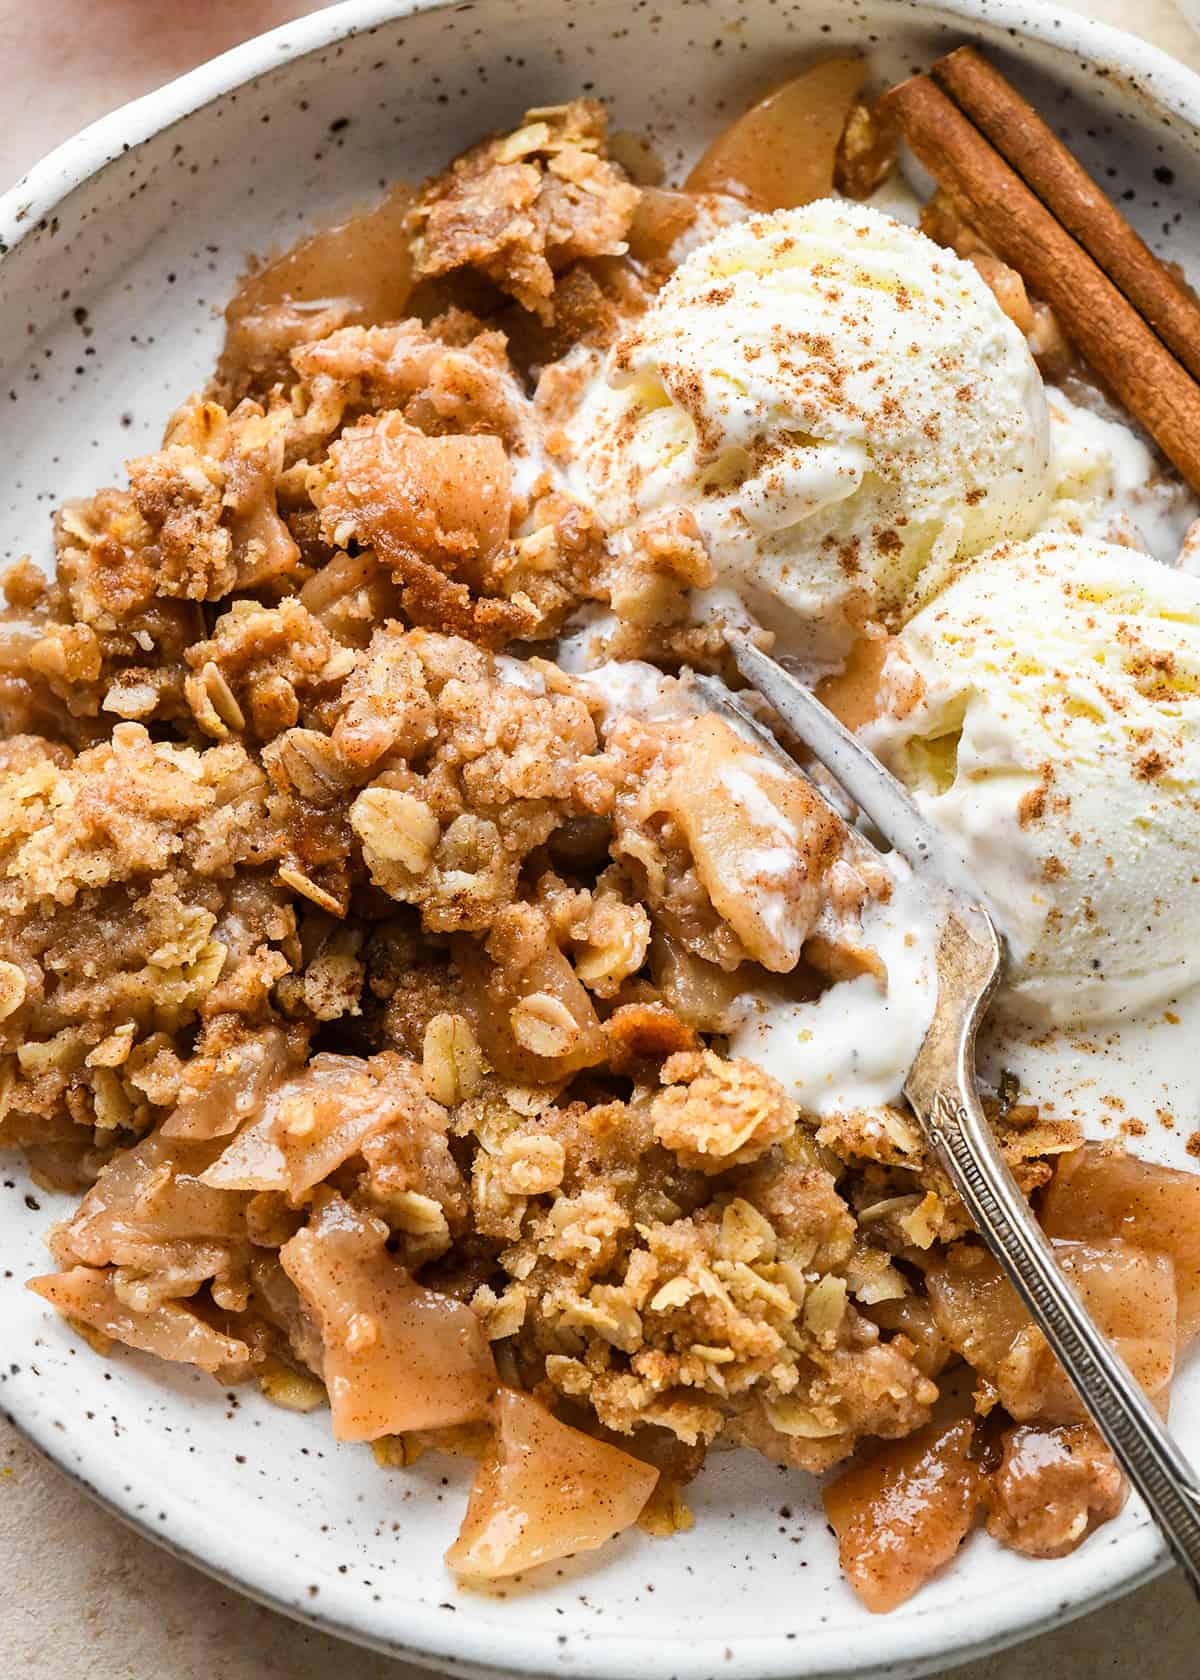 up close photo of apple crisp on a plate with ice cream and a fork